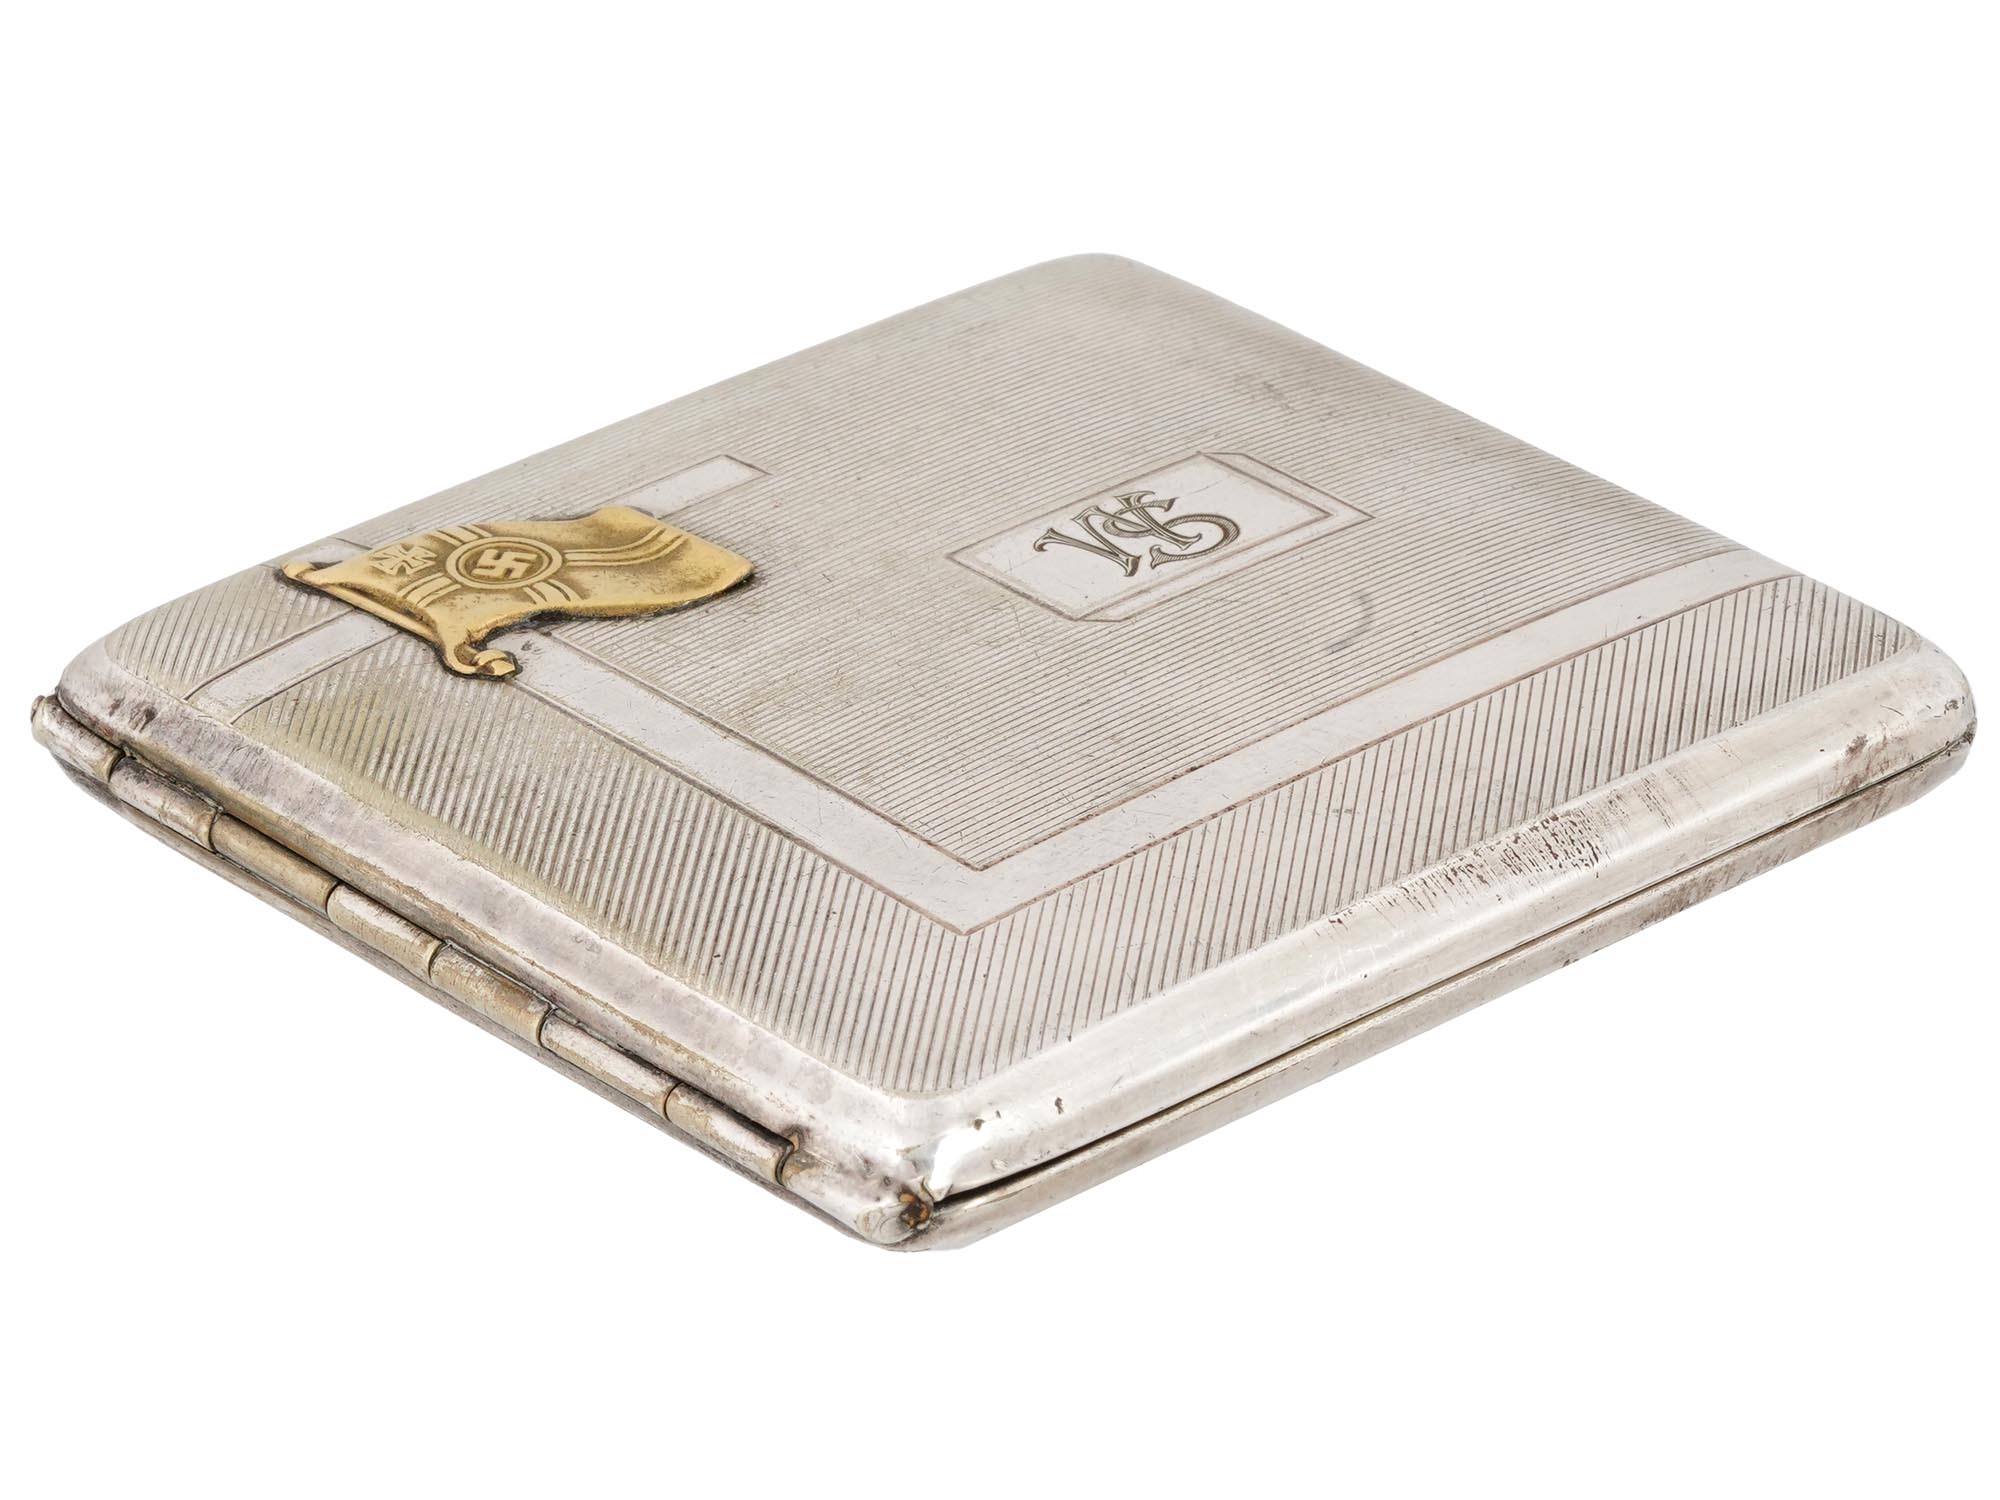 WWII GERMAN SILVER AND GOLD PLATED CIGARETTE CASE PIC-3